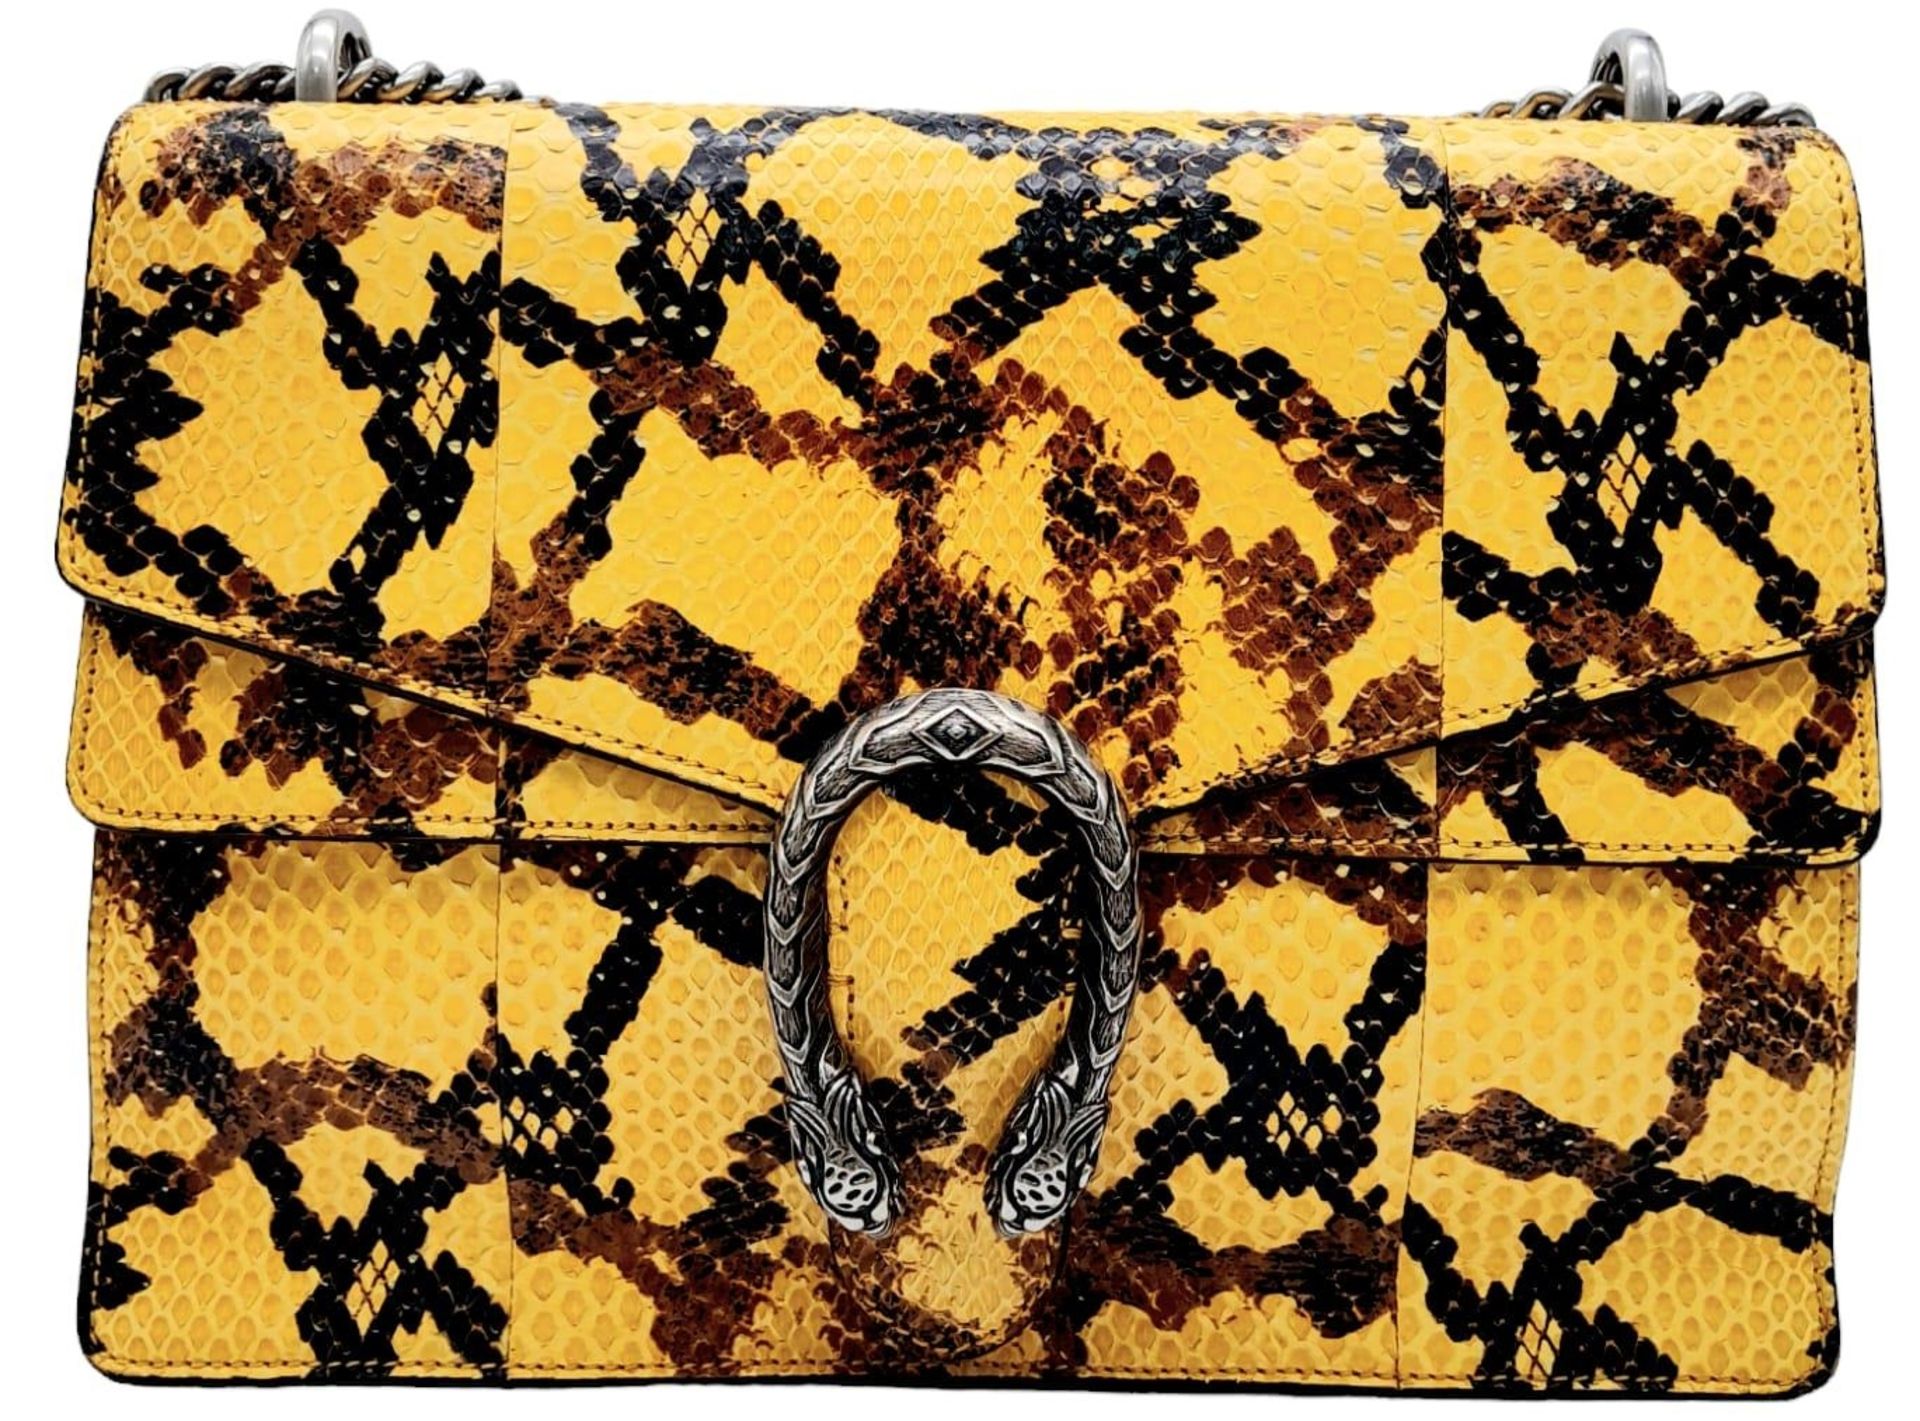 A Gucci Dionysus Python Pochette. With Silver Metal Hardware and Convertible Silver Metal Chain - Image 3 of 11